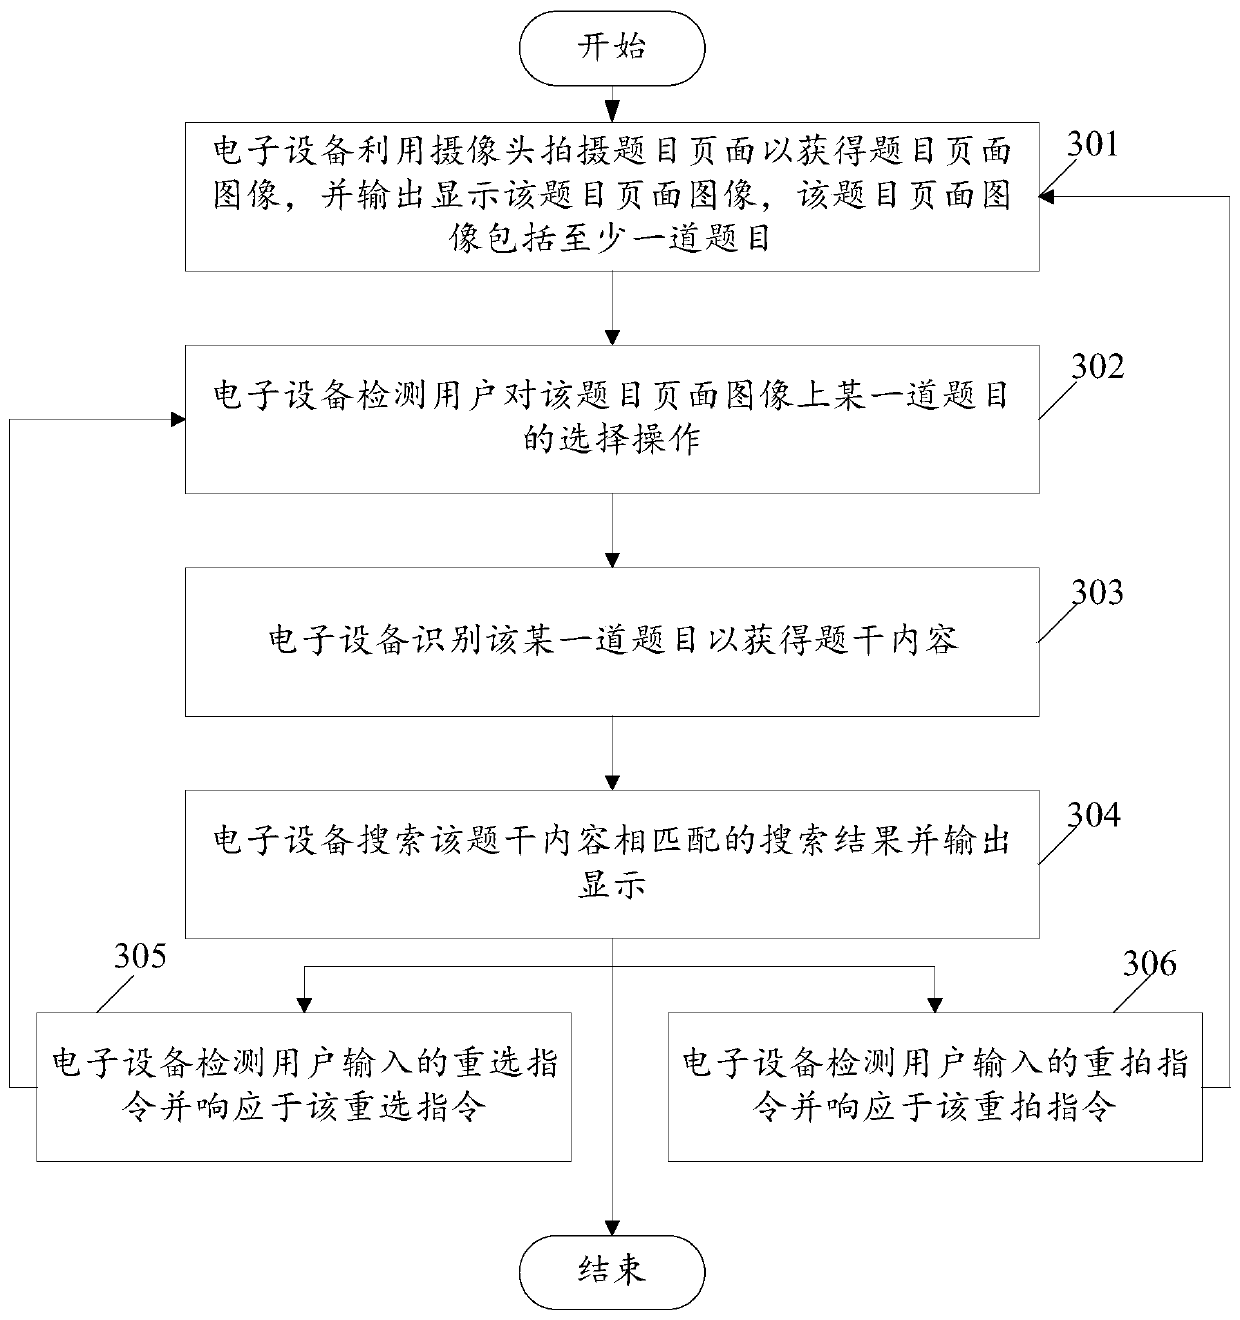 Method for searching electronic equipment topics and electronic equipment